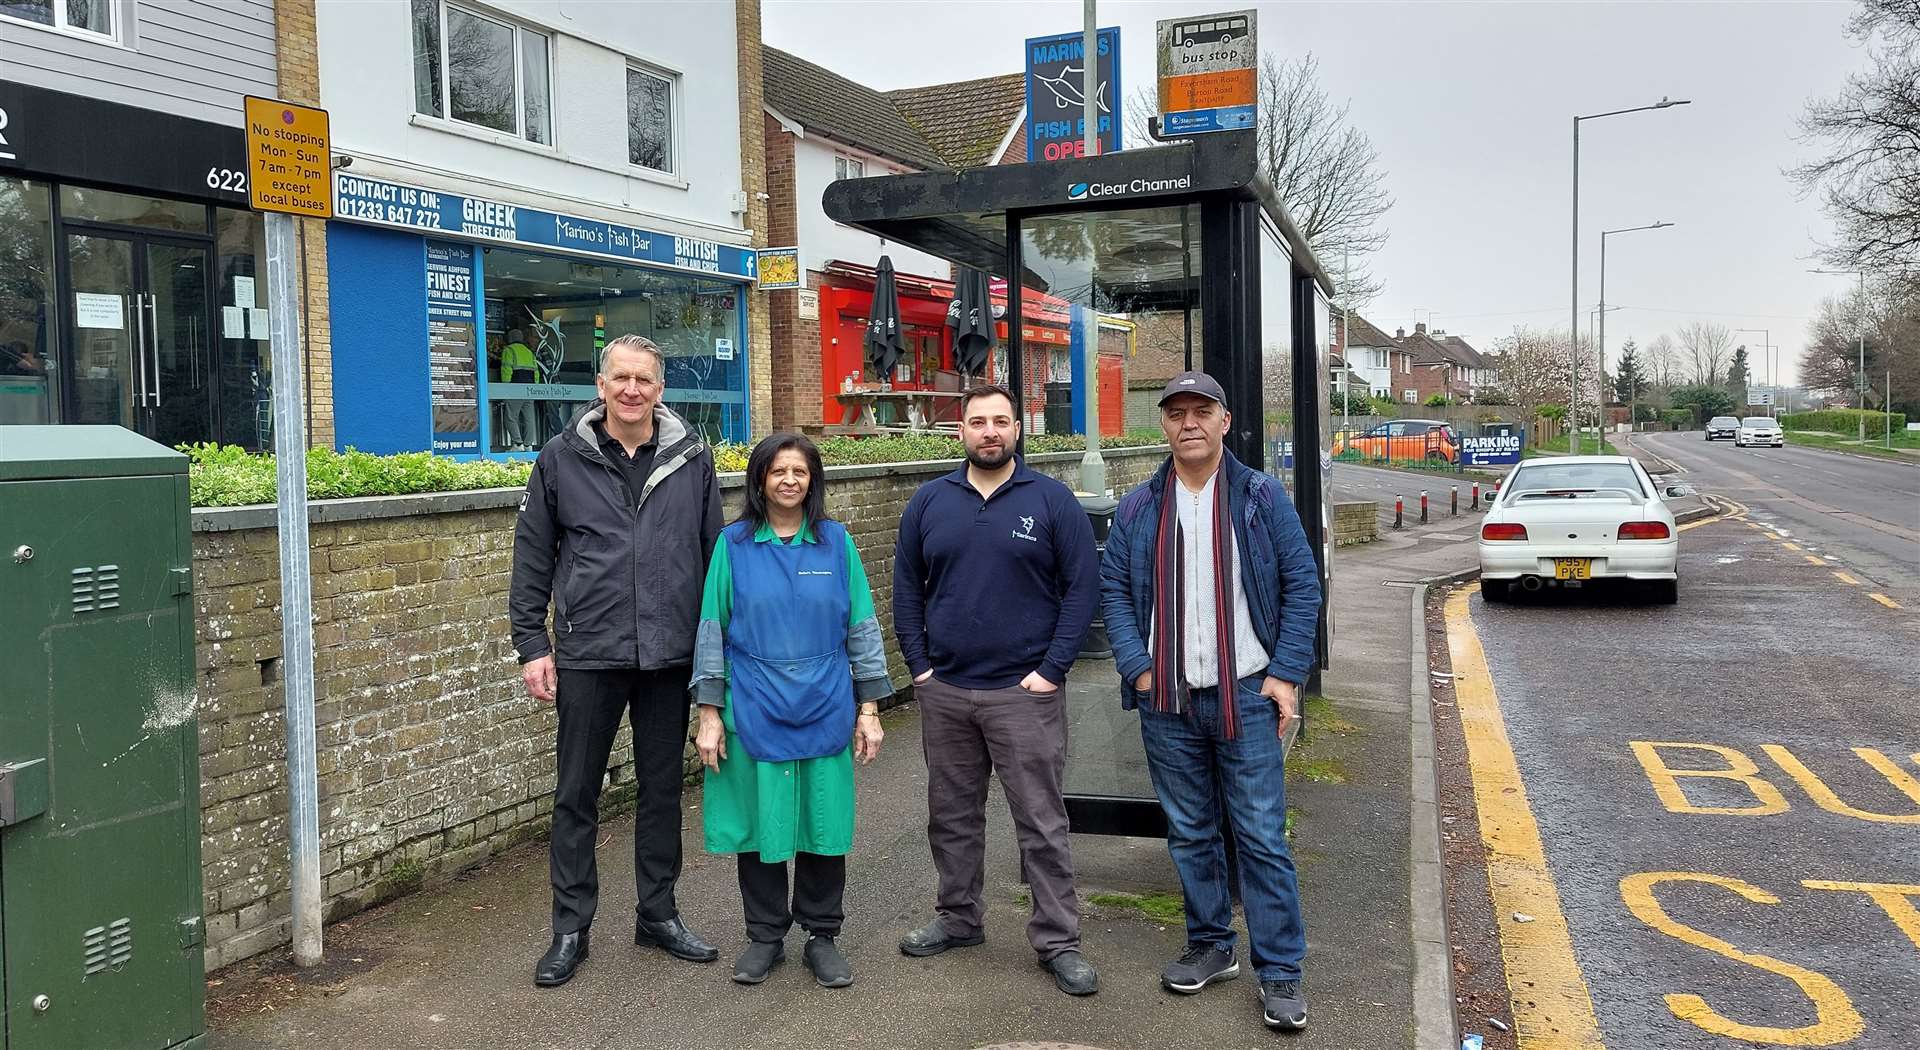 All four business owners are calling for action to reverse the closure; from the left to right: Simon Hall of Hall Hair, Bella Patel of Savers Newsagents, Orthy Karios and Yakup Yalcin from Ashford Dry Cleaners